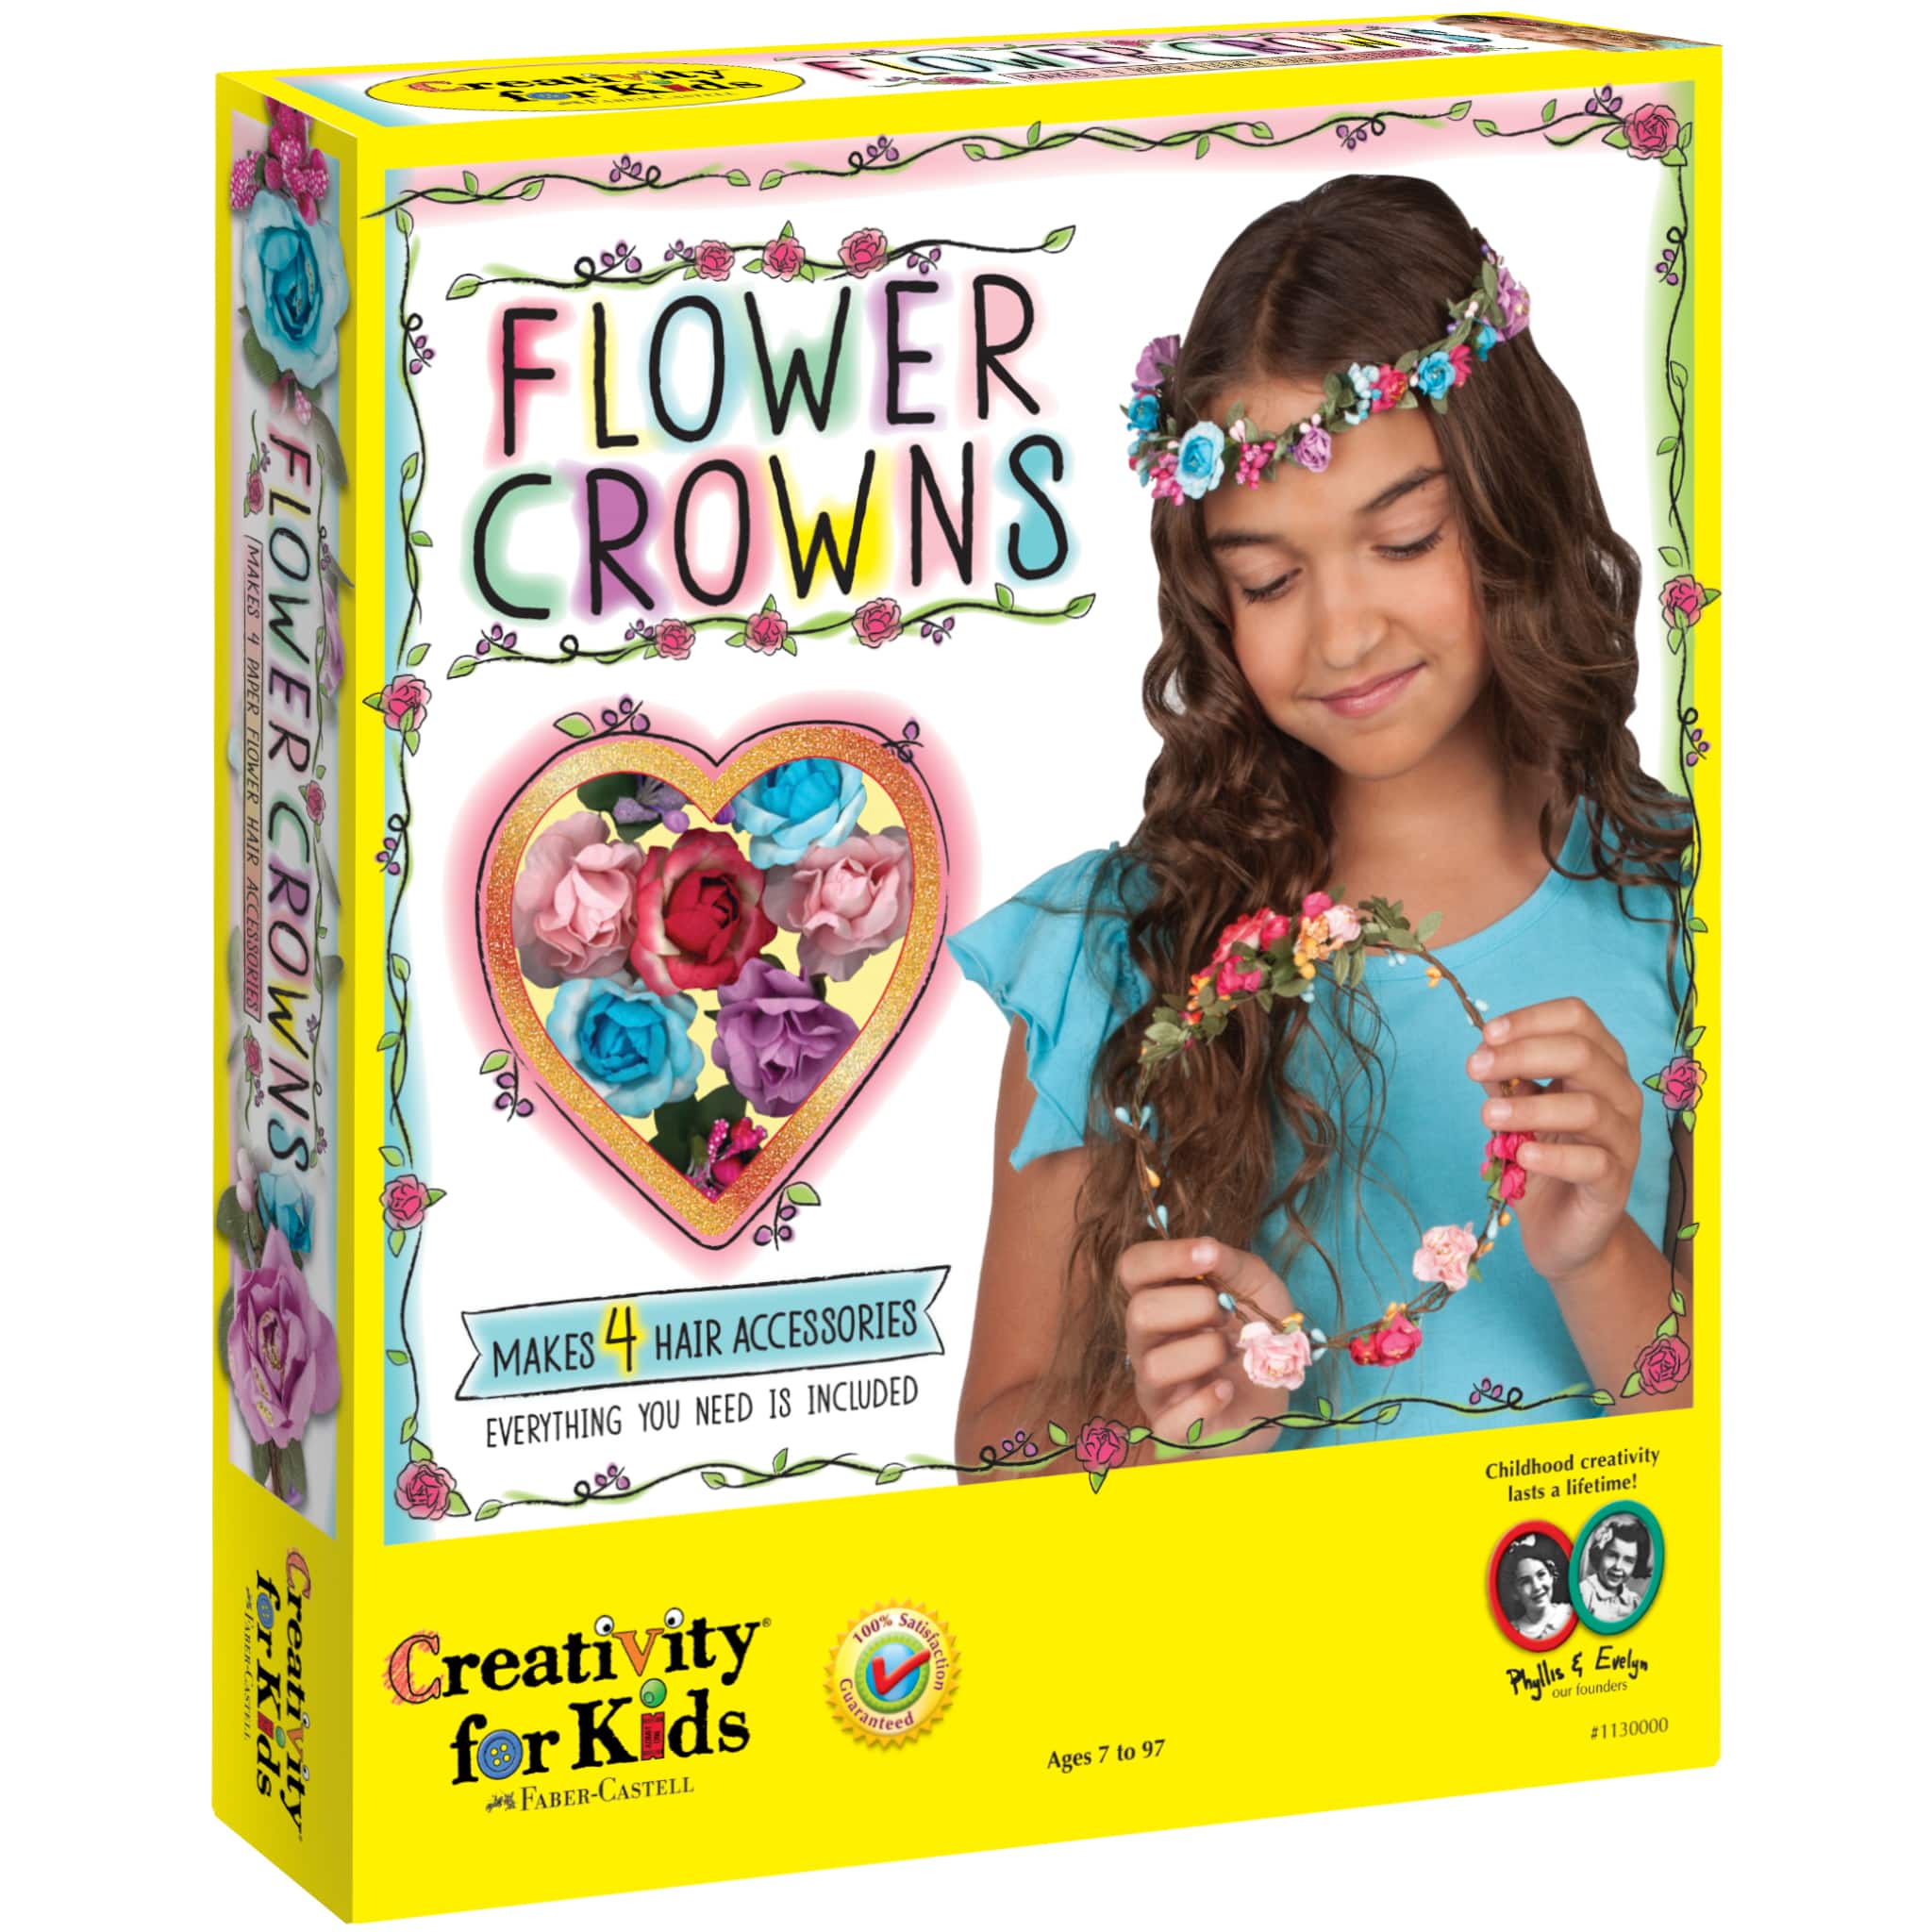 Craft Kits Gifts for Kids, Kids Painting Activities, Make a Crown Craft Kit  for Kids, Fabric Crown Gifts for Kids Christmas, Arts and Crafts 